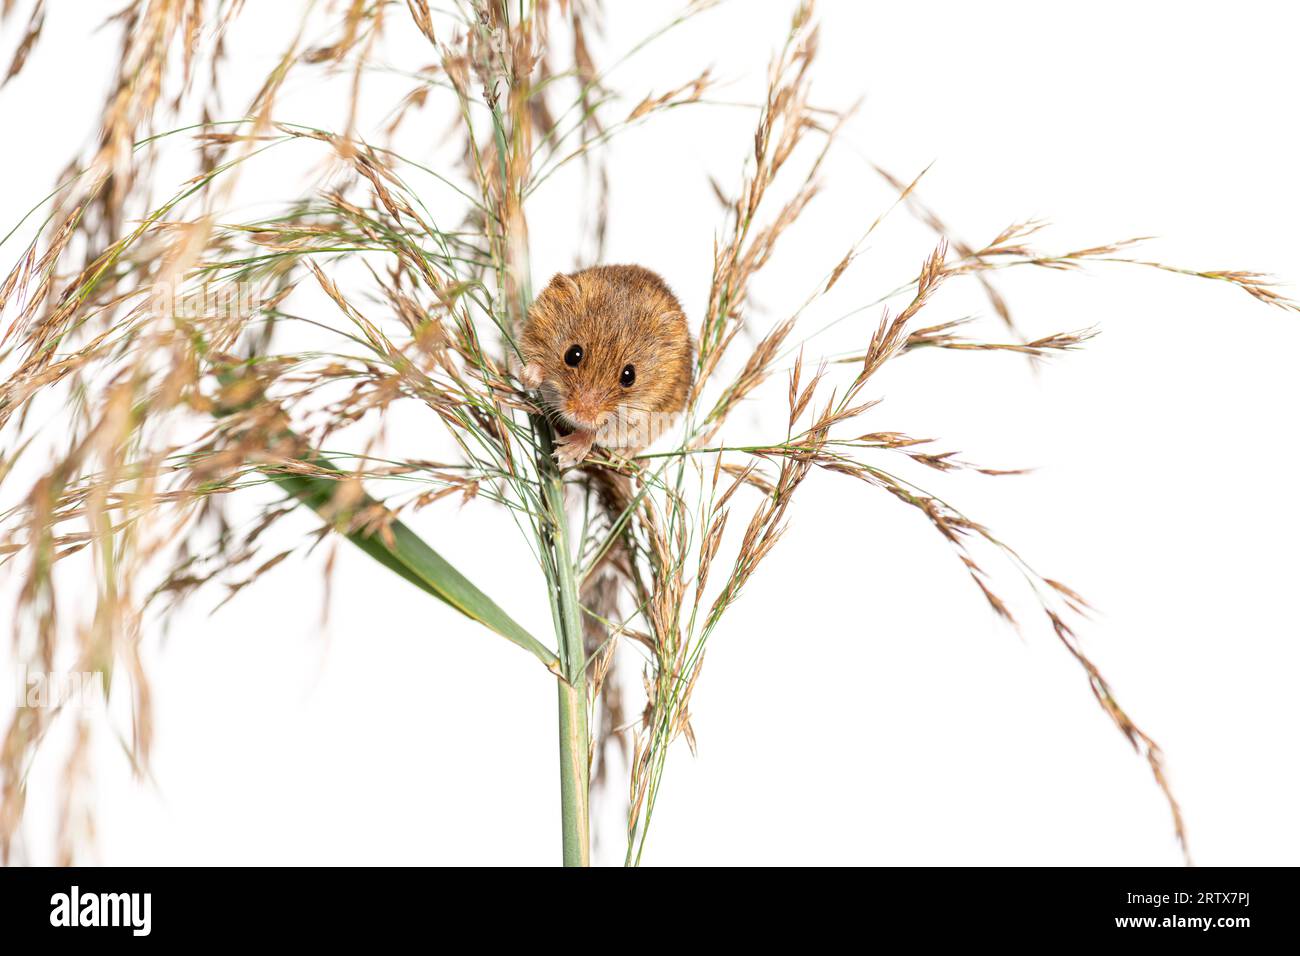 Harvest mouse, Micromys minutus, climbing, holding and balancing on high grass, isolated on white Stock Photo